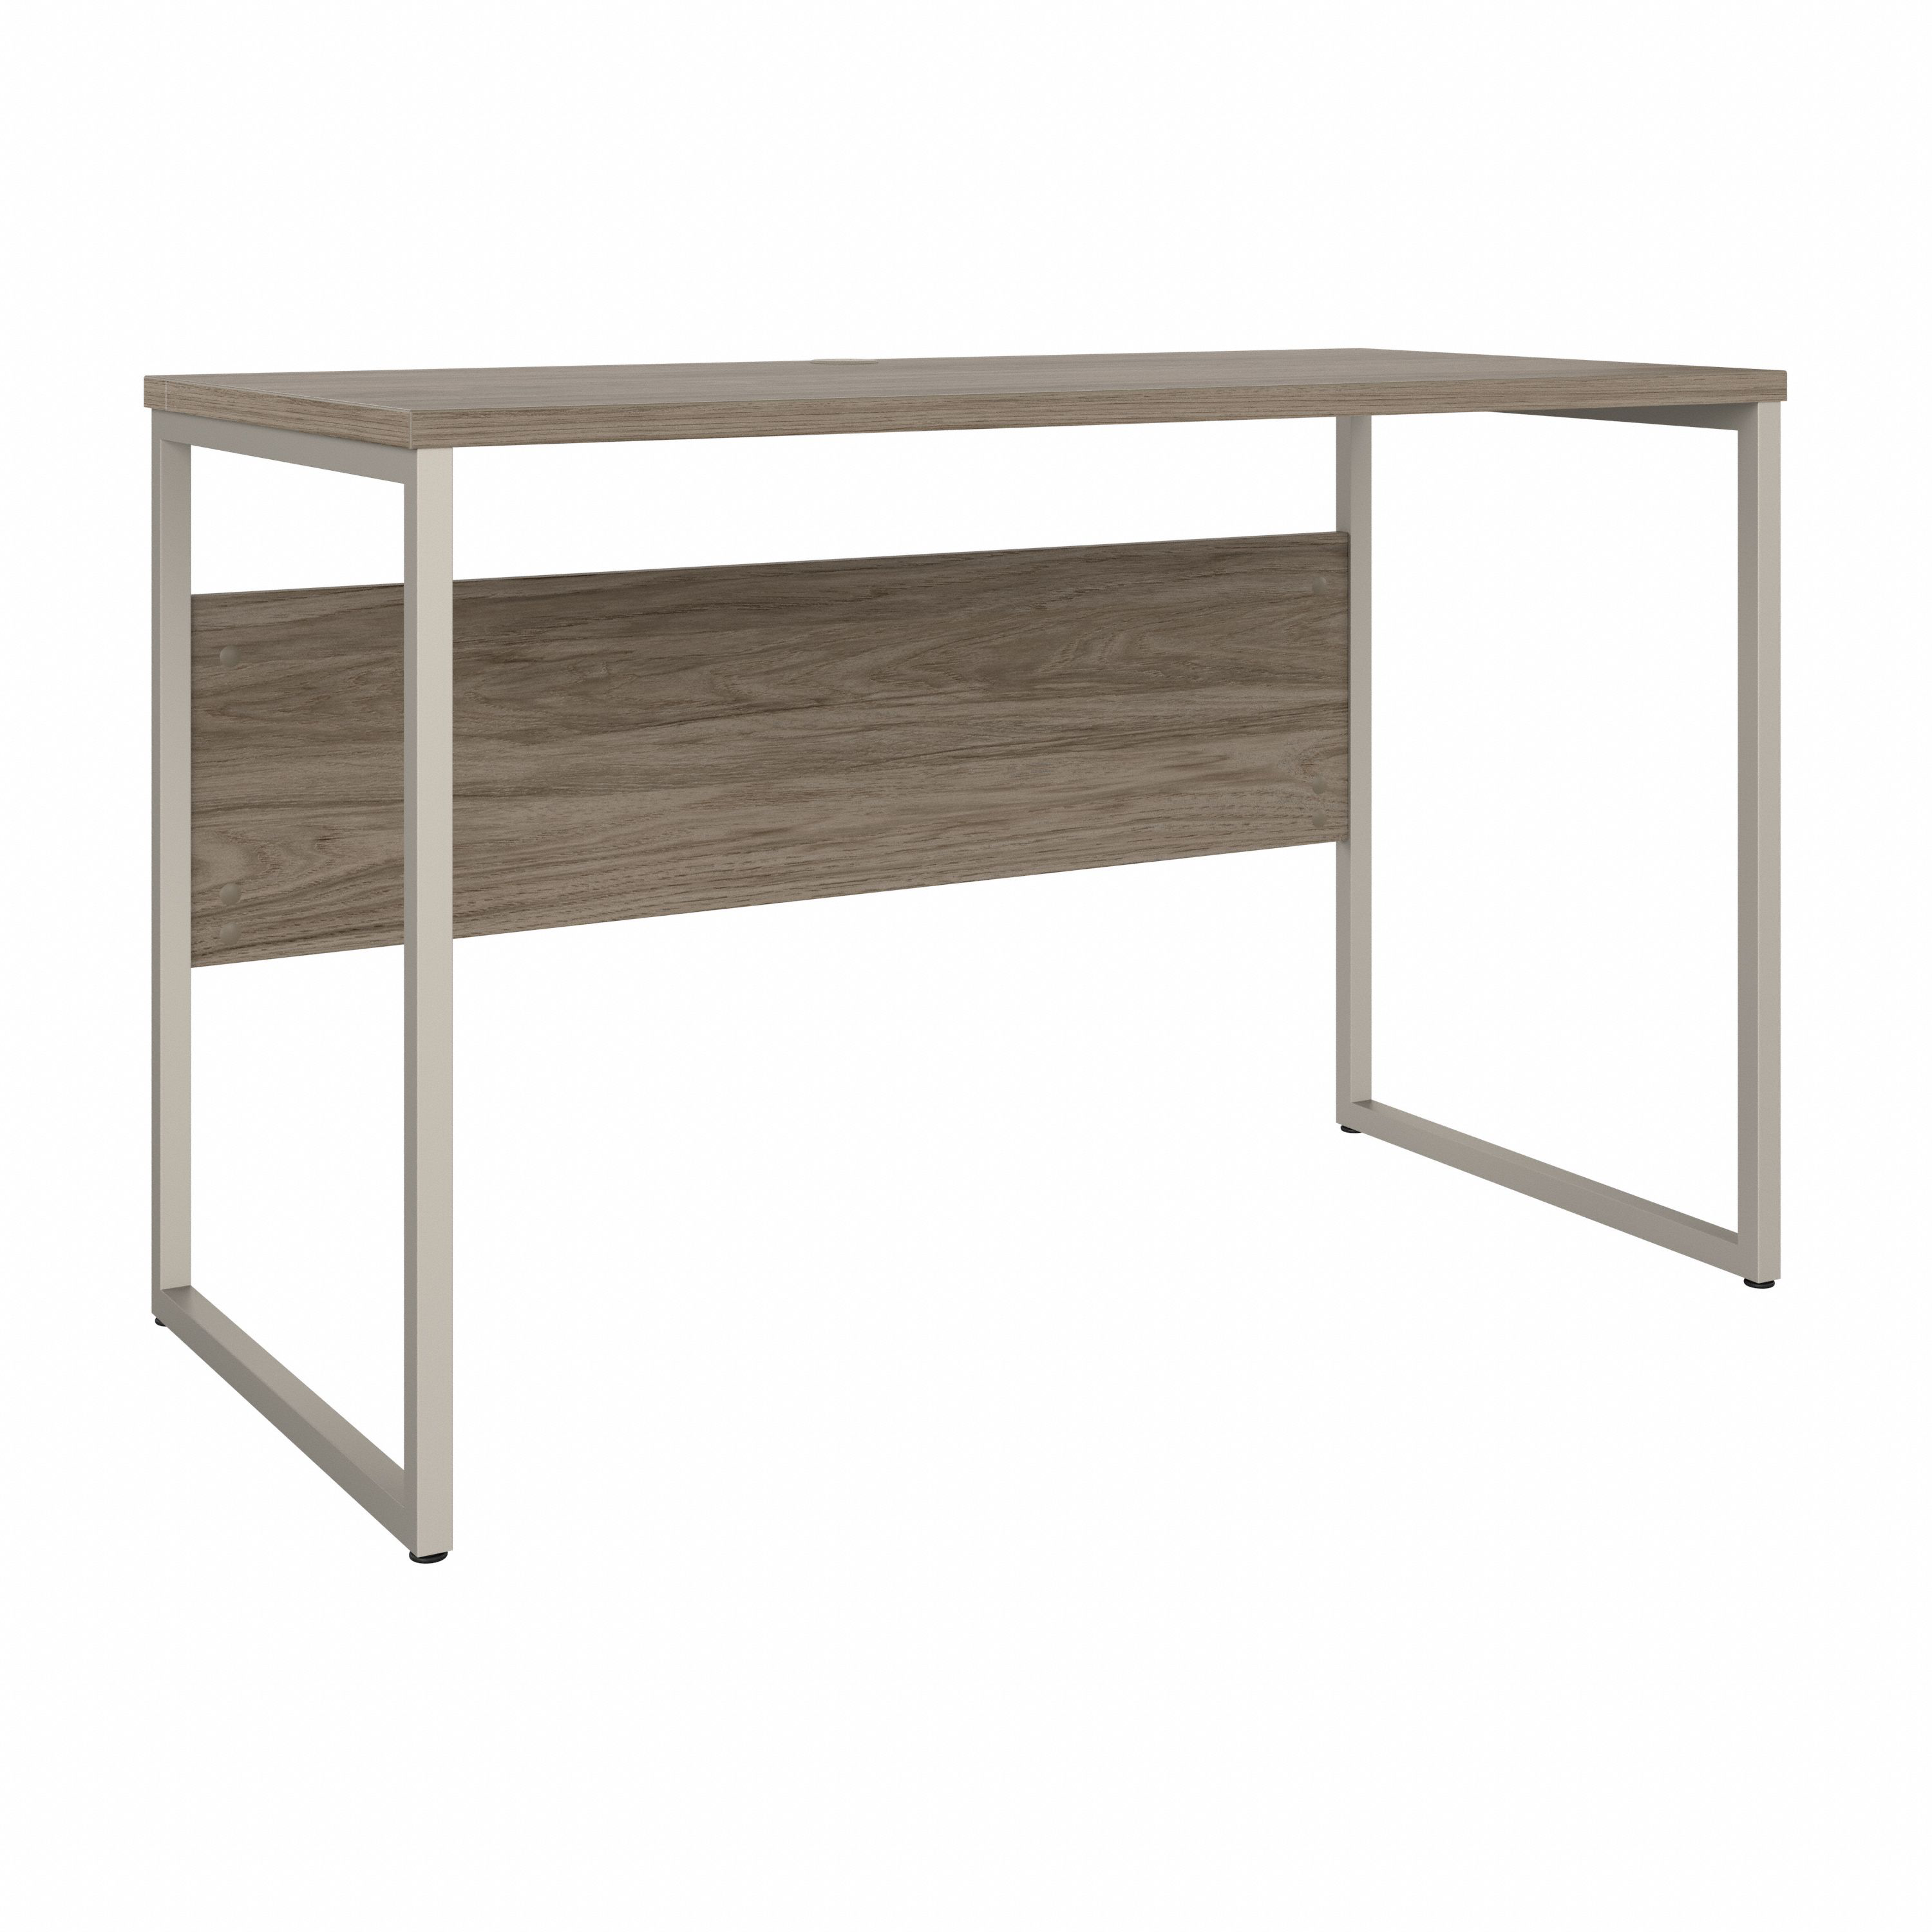 Shop Bush Business Furniture Hybrid 48W x 24D Computer Table Desk with Metal Legs 02 HYD148MH #color_modern hickory